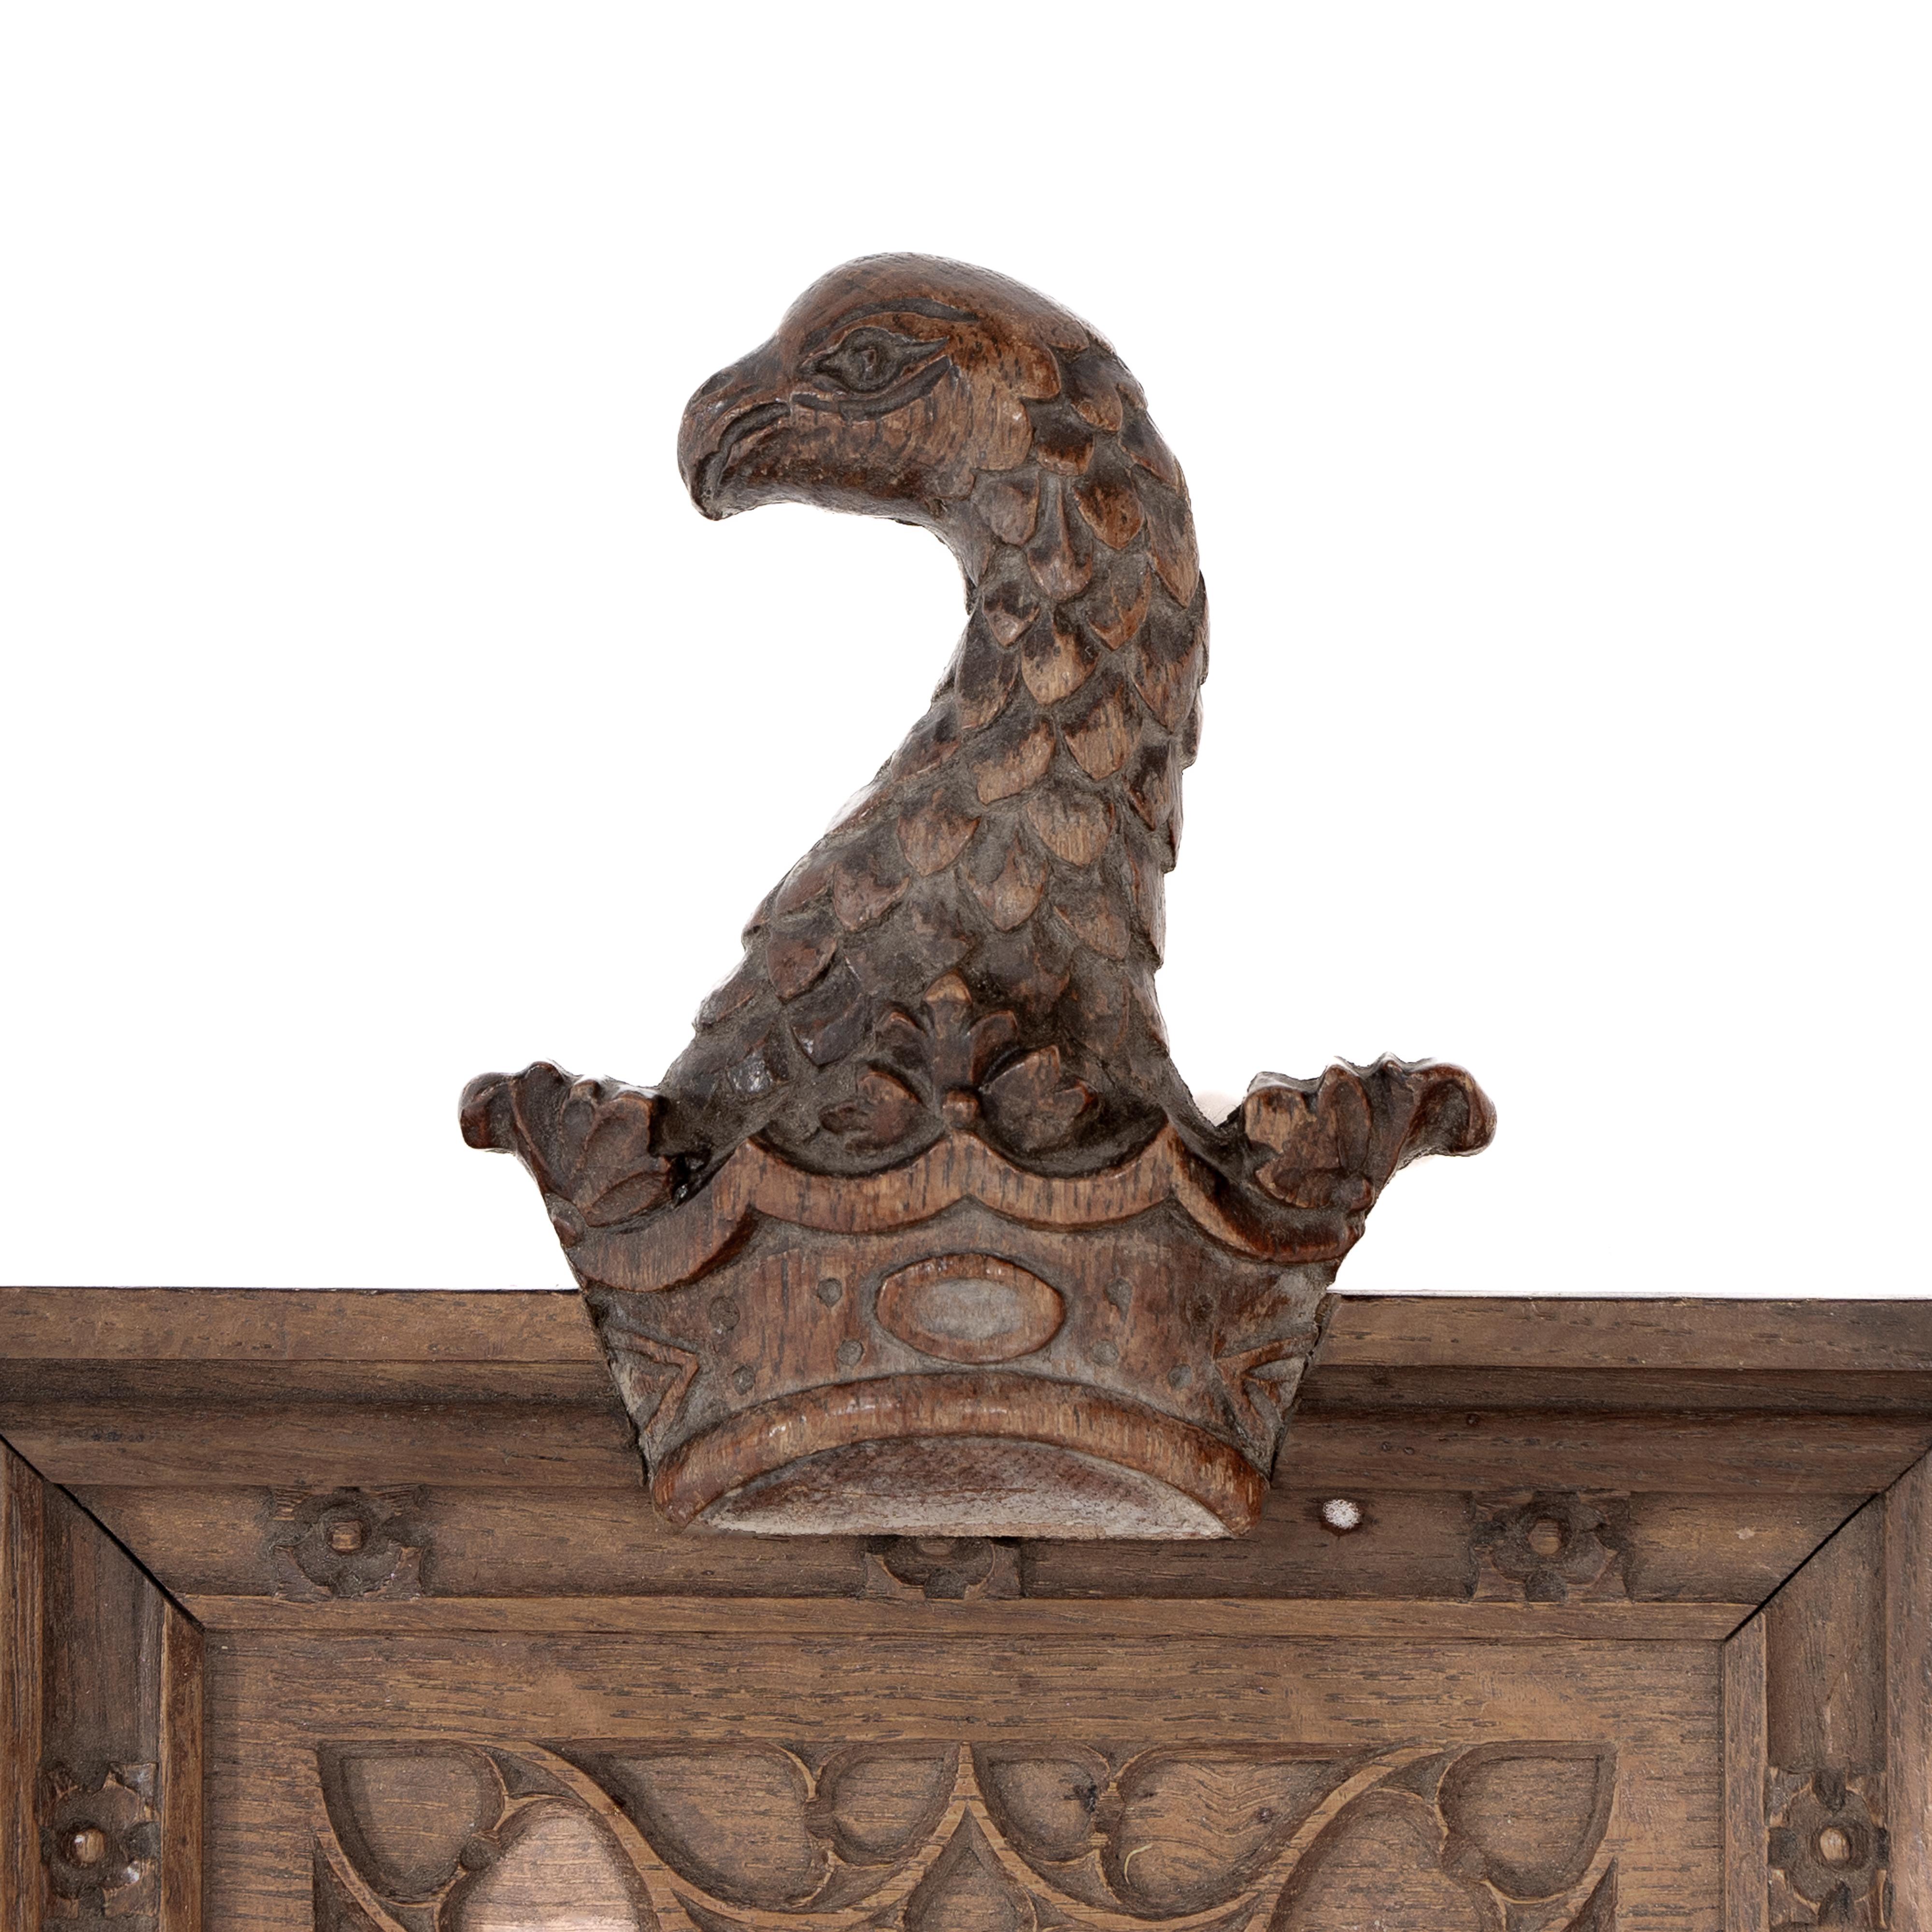 A Gothic Revival oak mirror surmounted with a carved eagle to the top, and blind Gothic tracery below forming an upper arch, the sides decorated with little carved florets. Retains the original distressed mirror.
